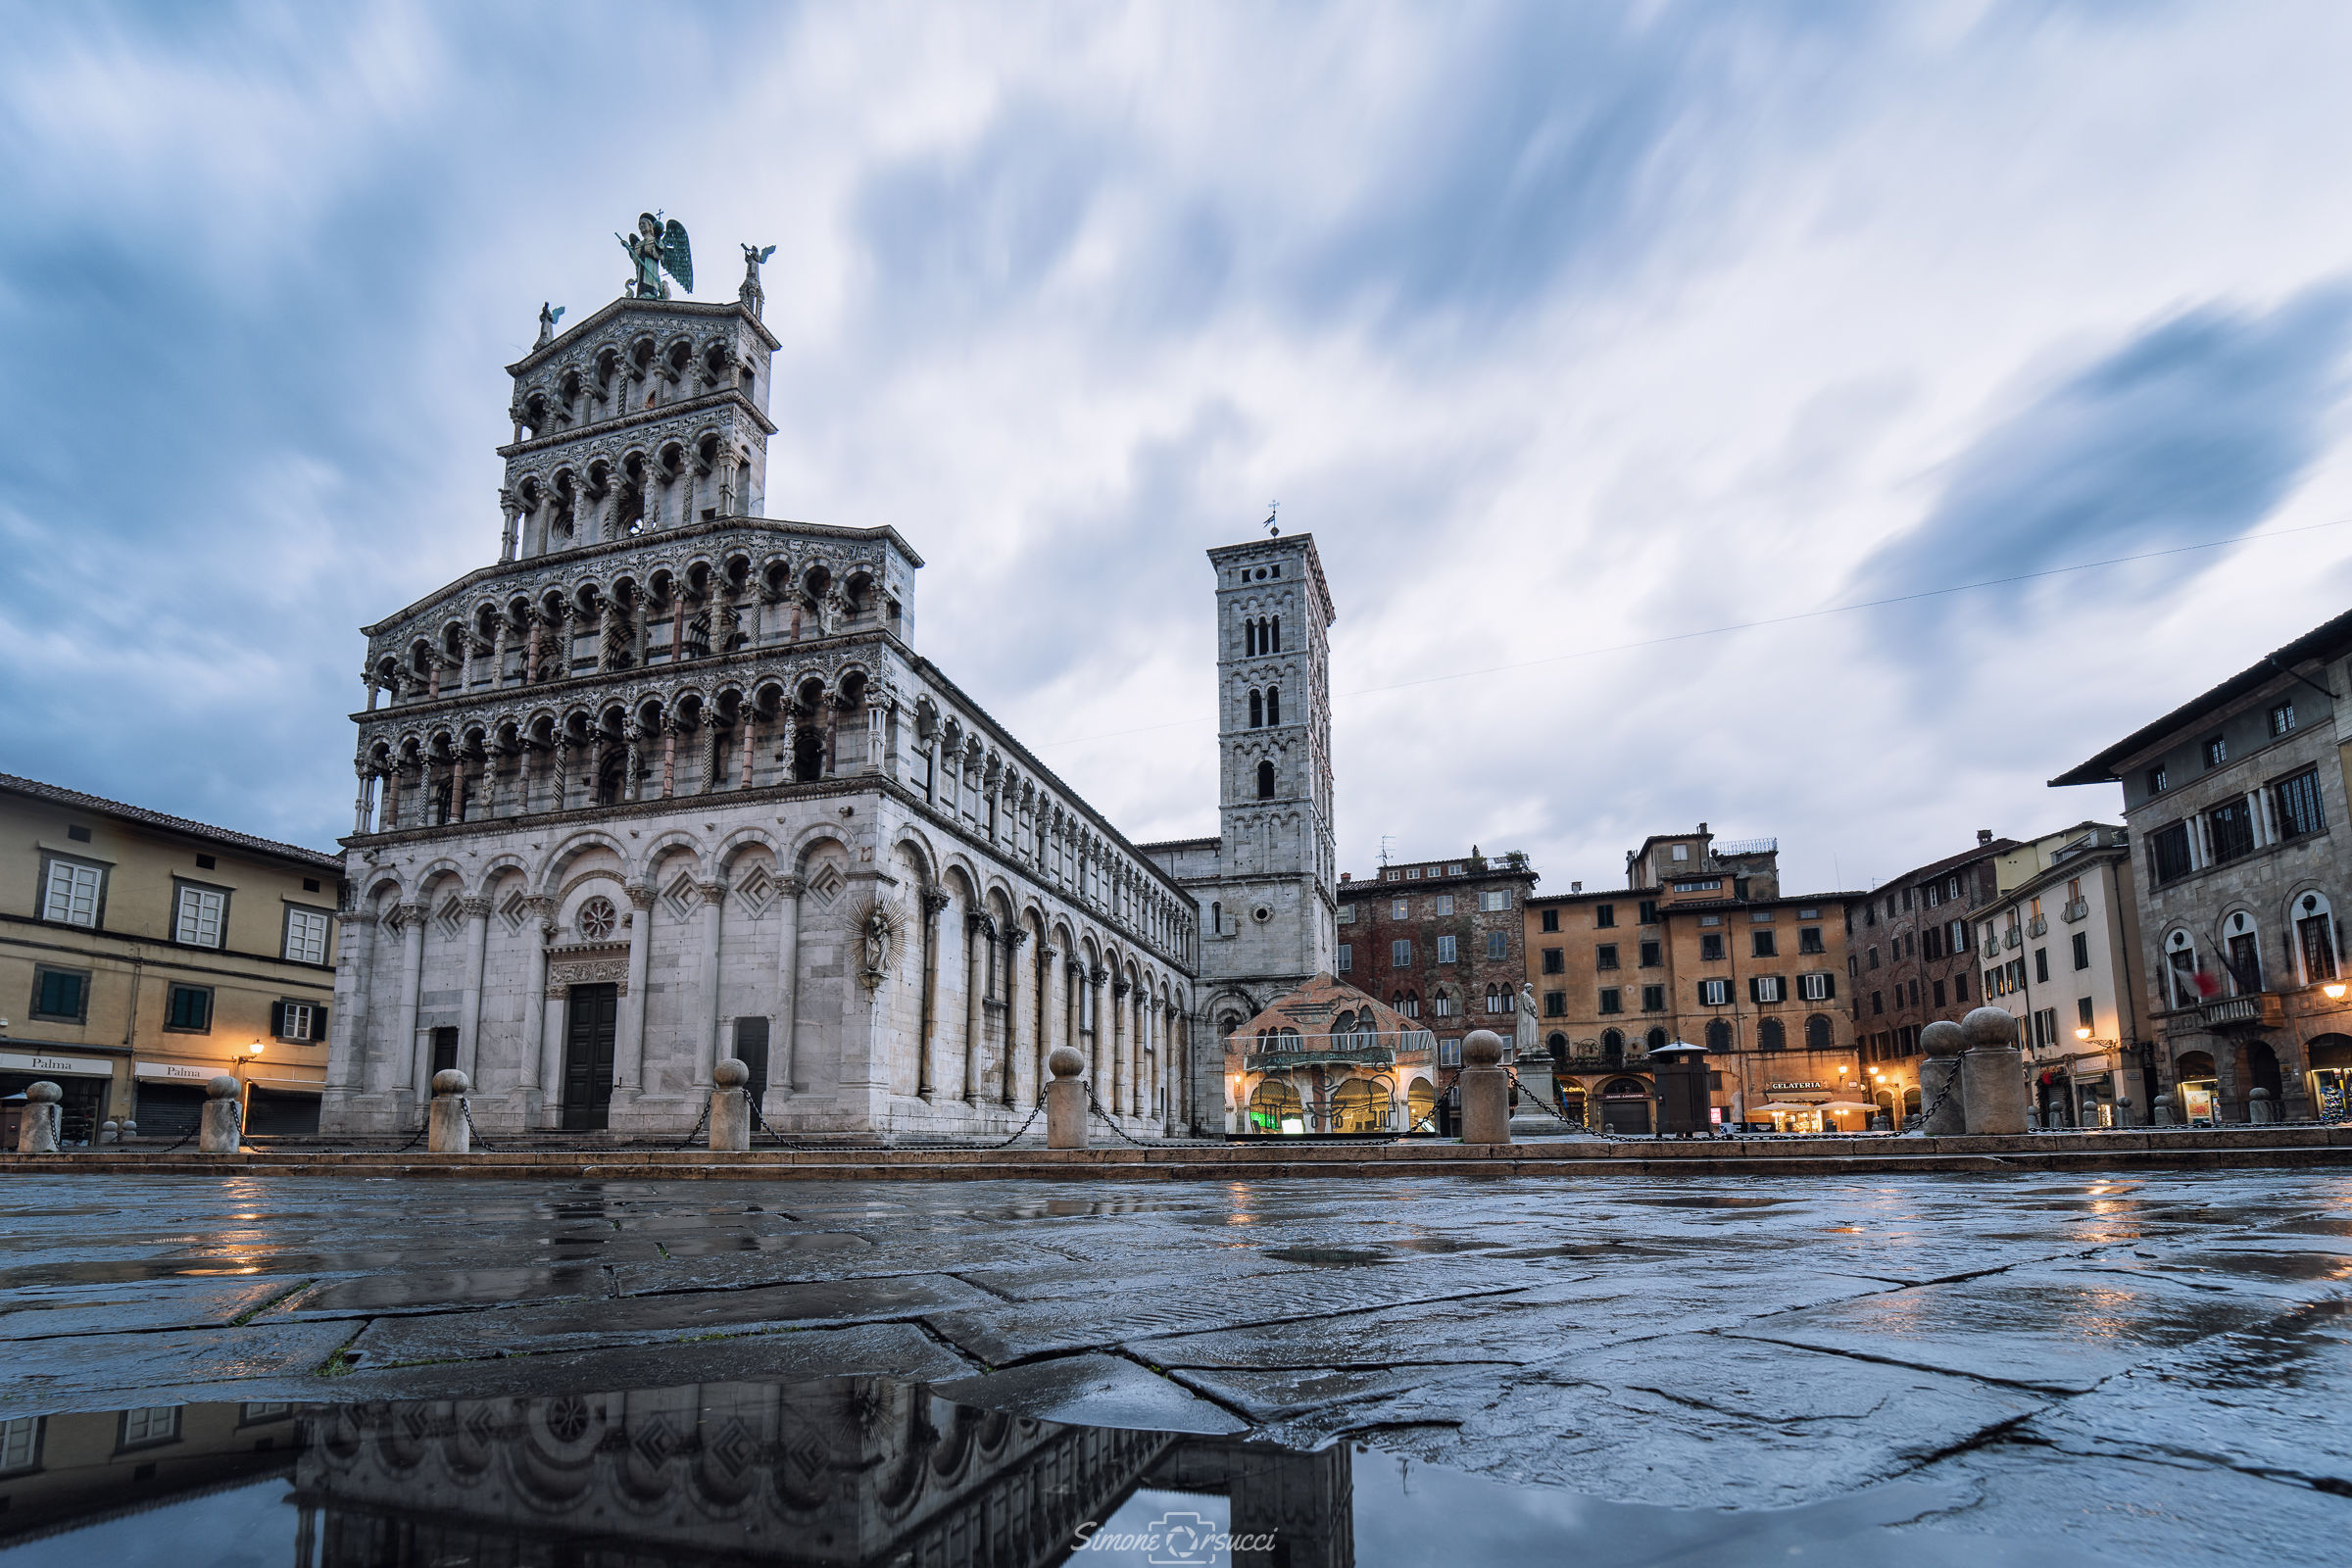 Piazza S. Michele wakes up wet...